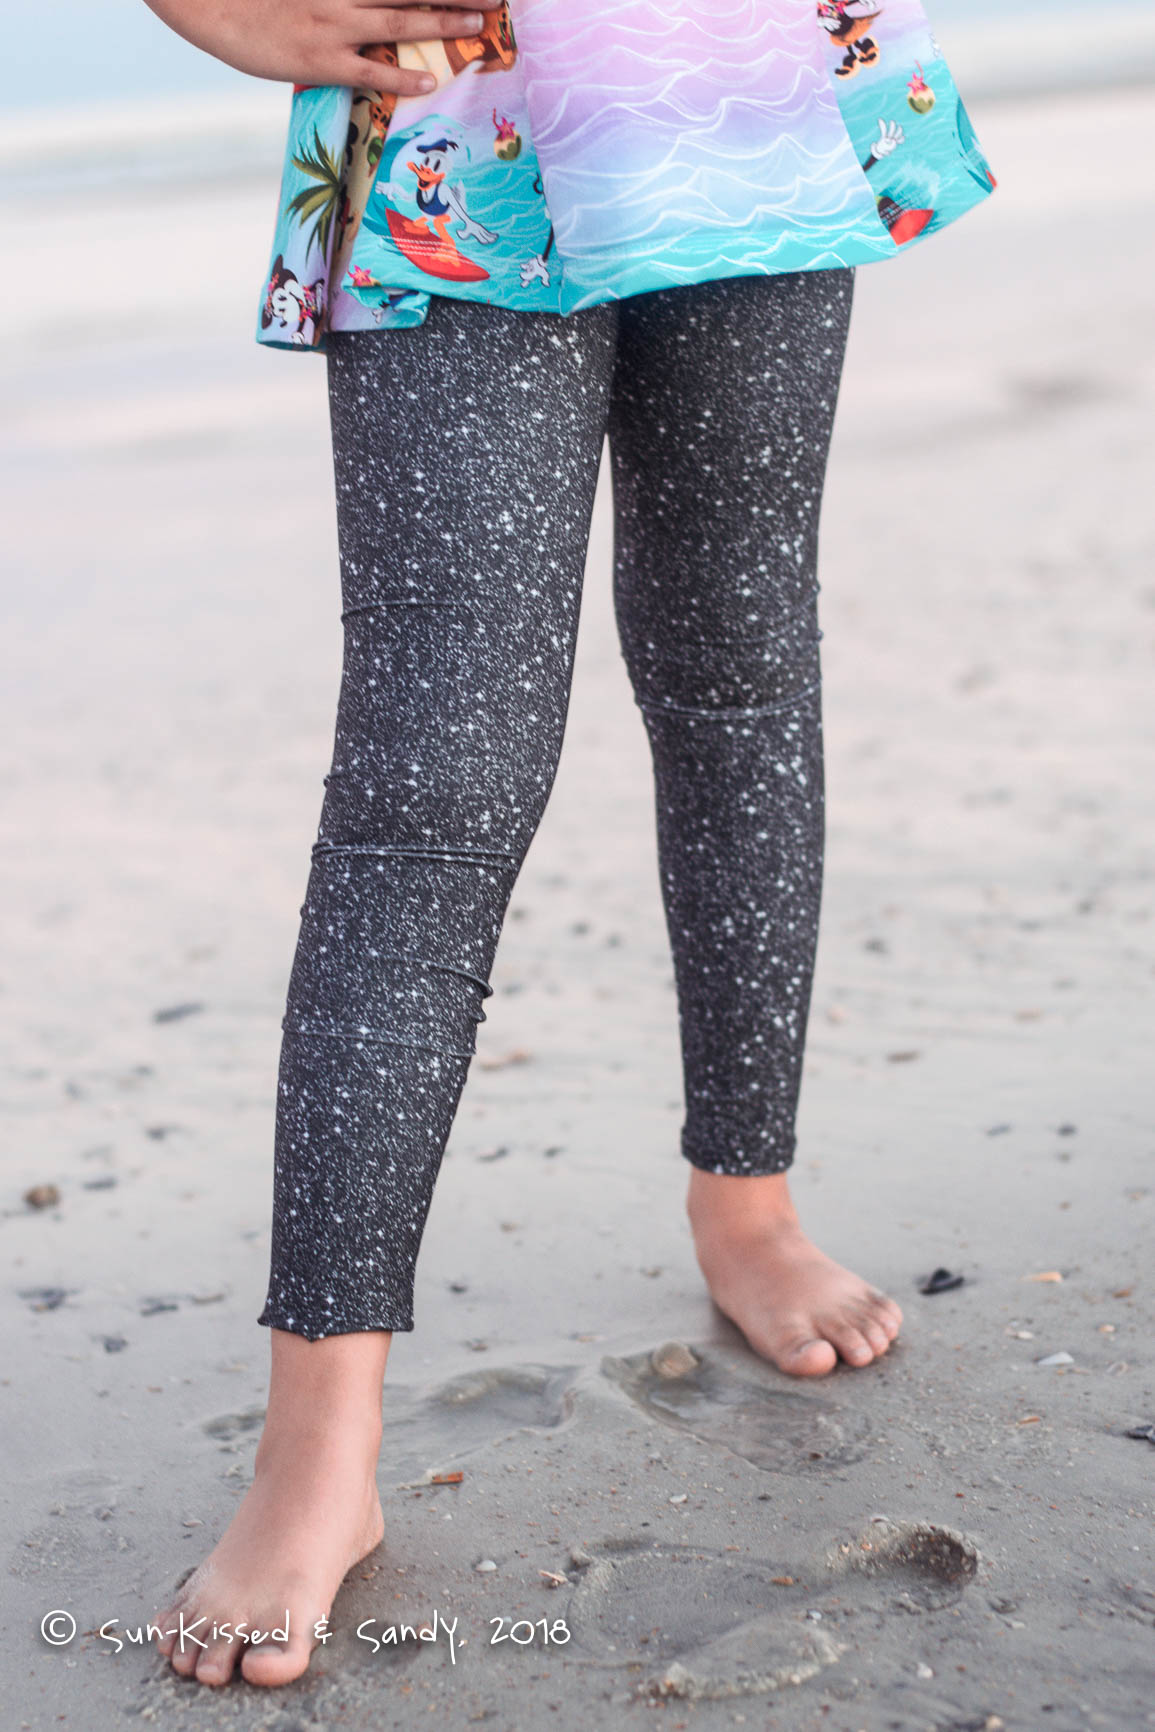 All Black + Sequin Leggings Holiday Look - The Styled Press